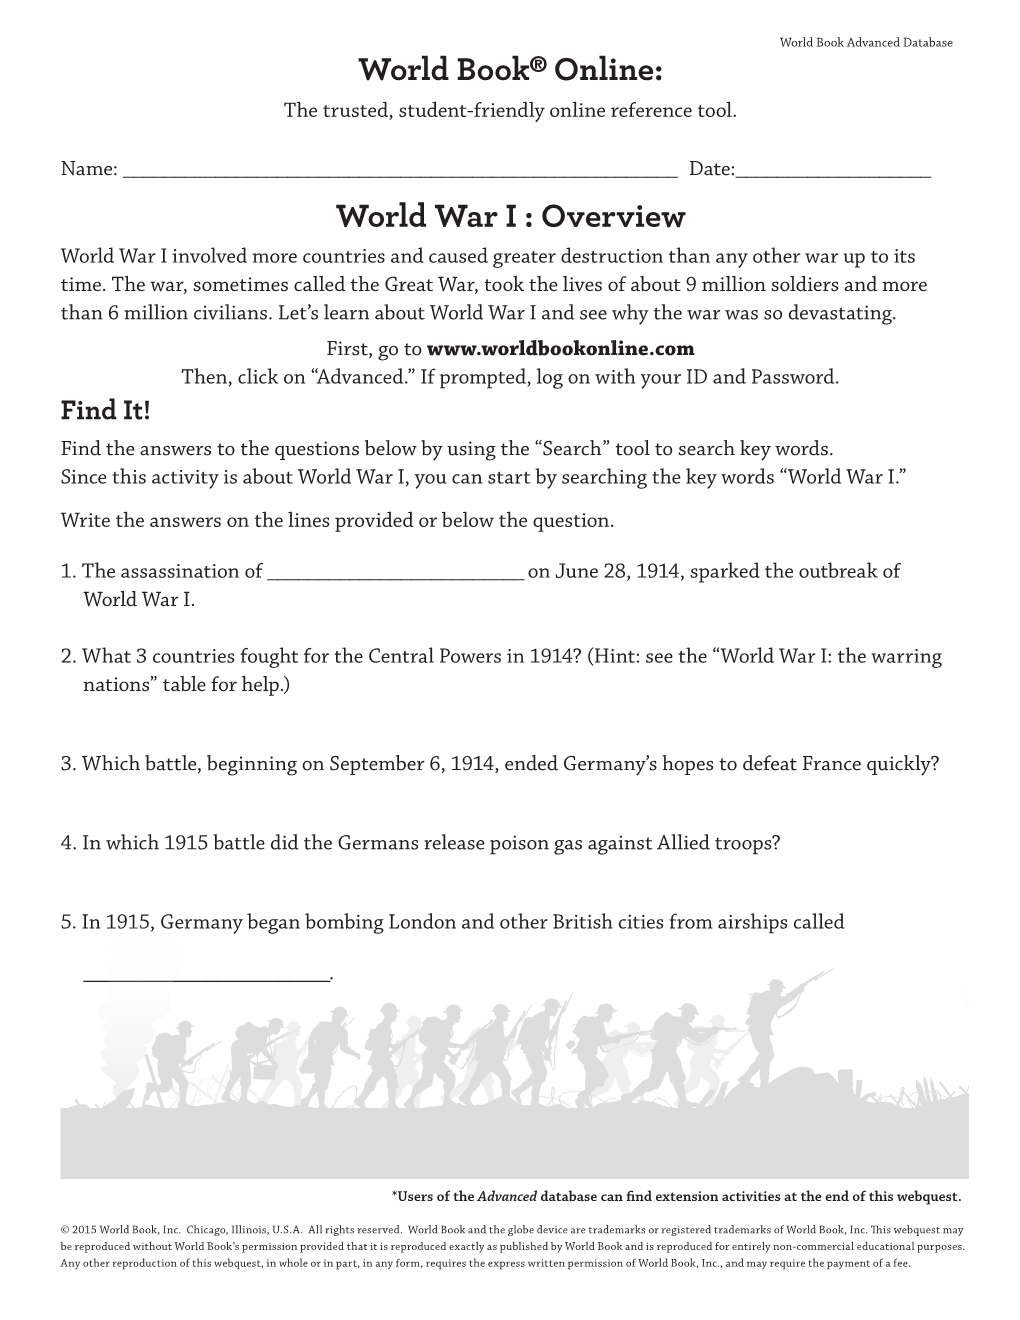 World War I : Overview World War I Involved More Countries and Caused Greater Destruction Than Any Other War up to Its Time